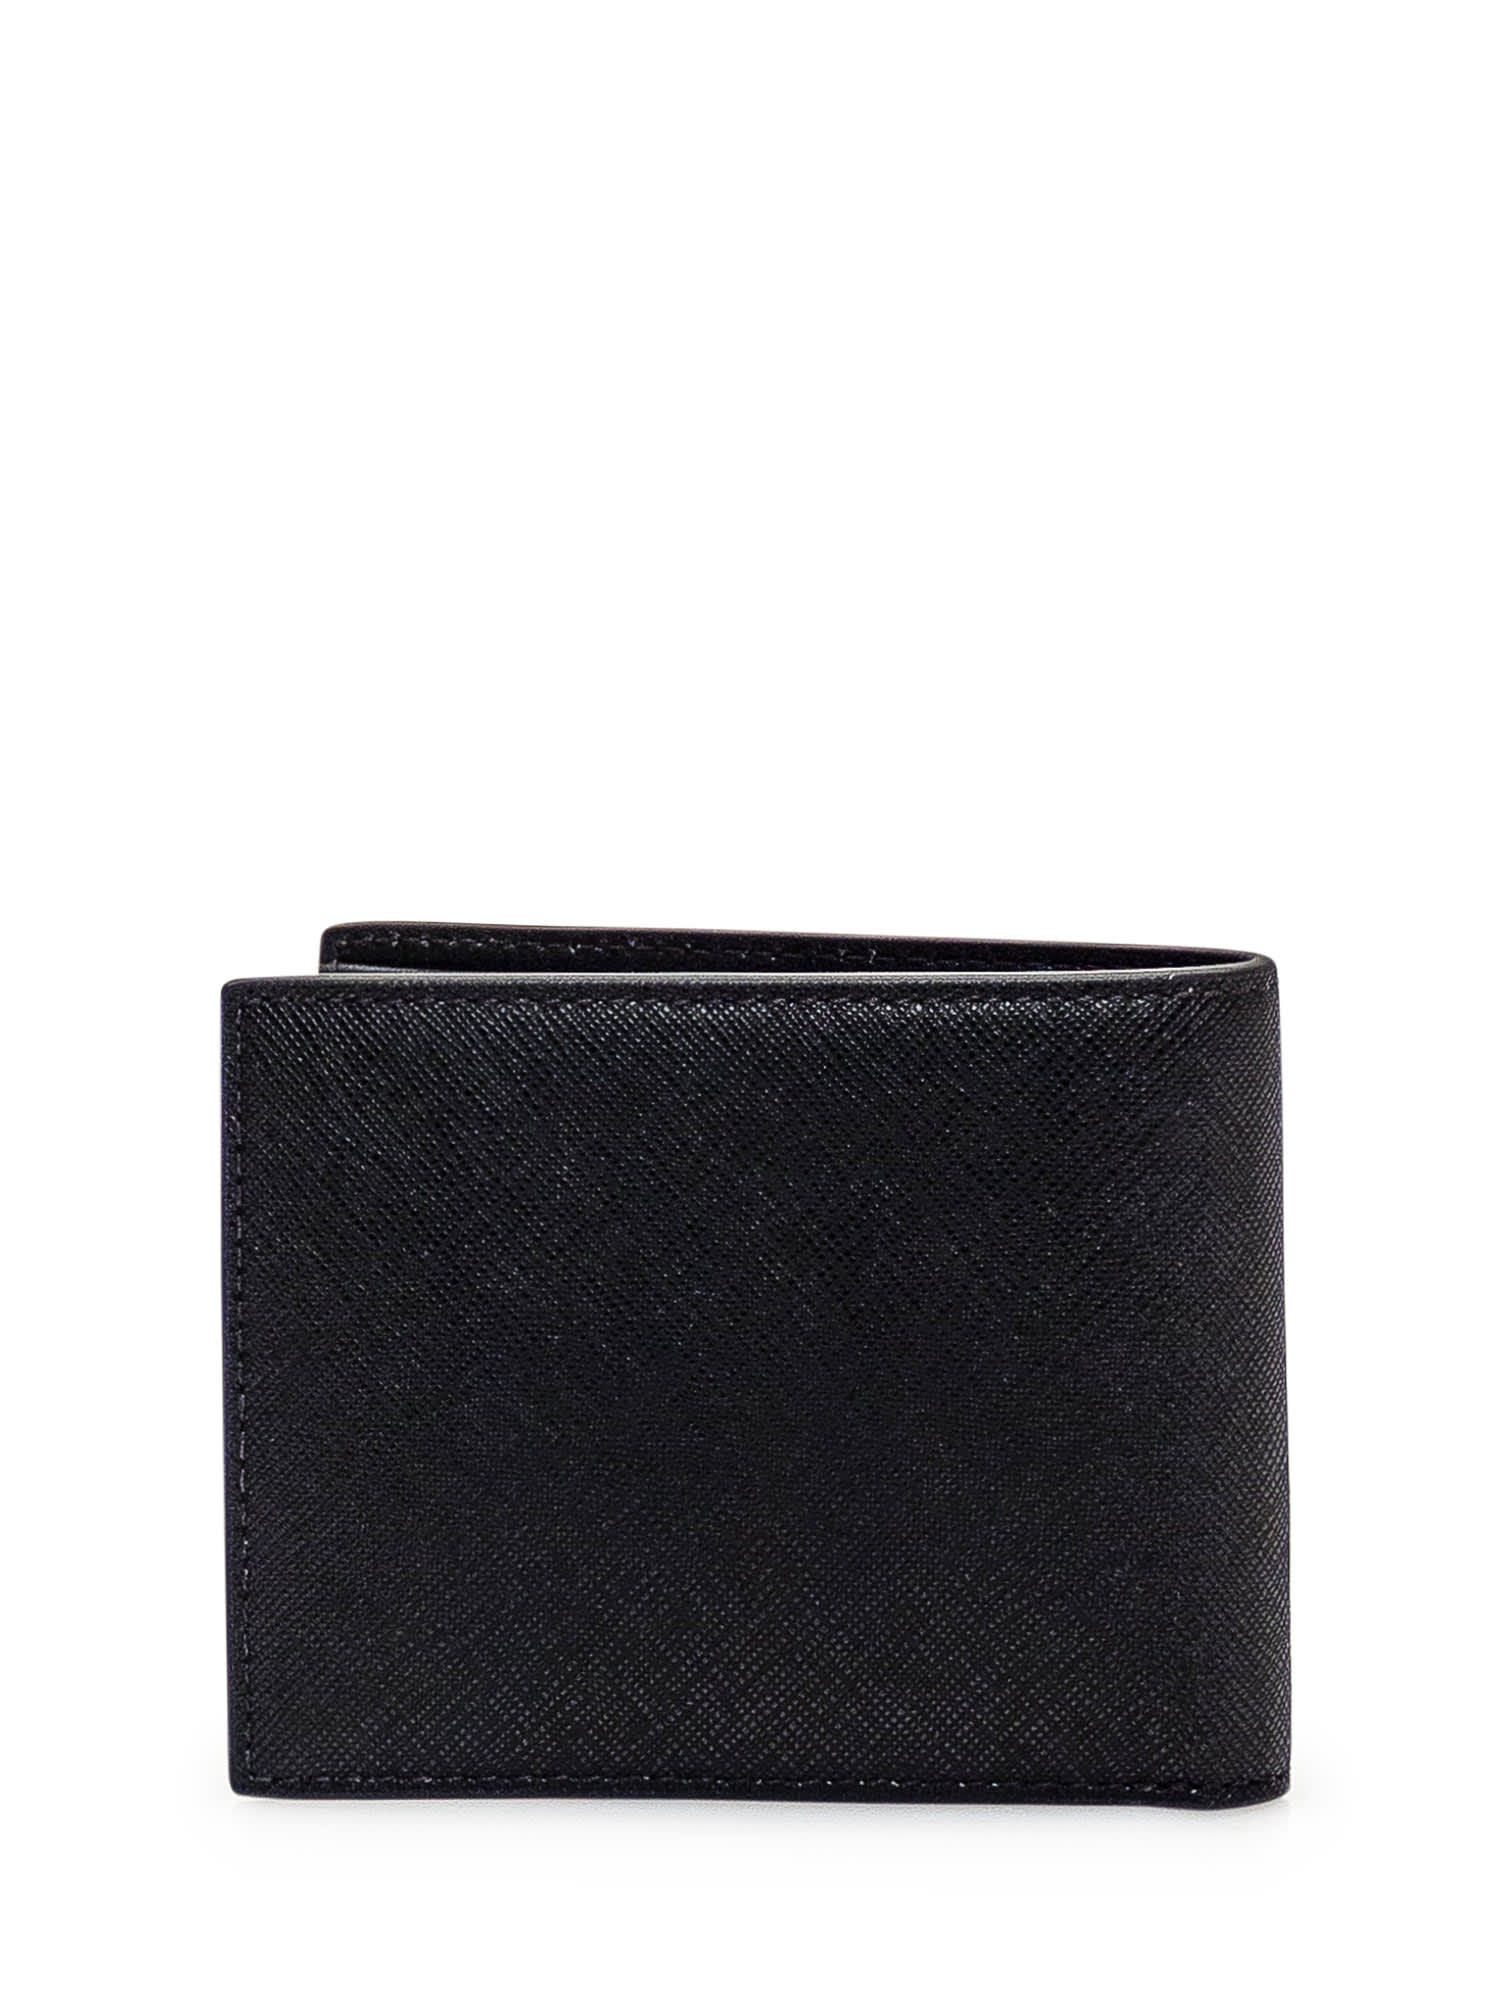 Shop Bally Leather Wallet In Black